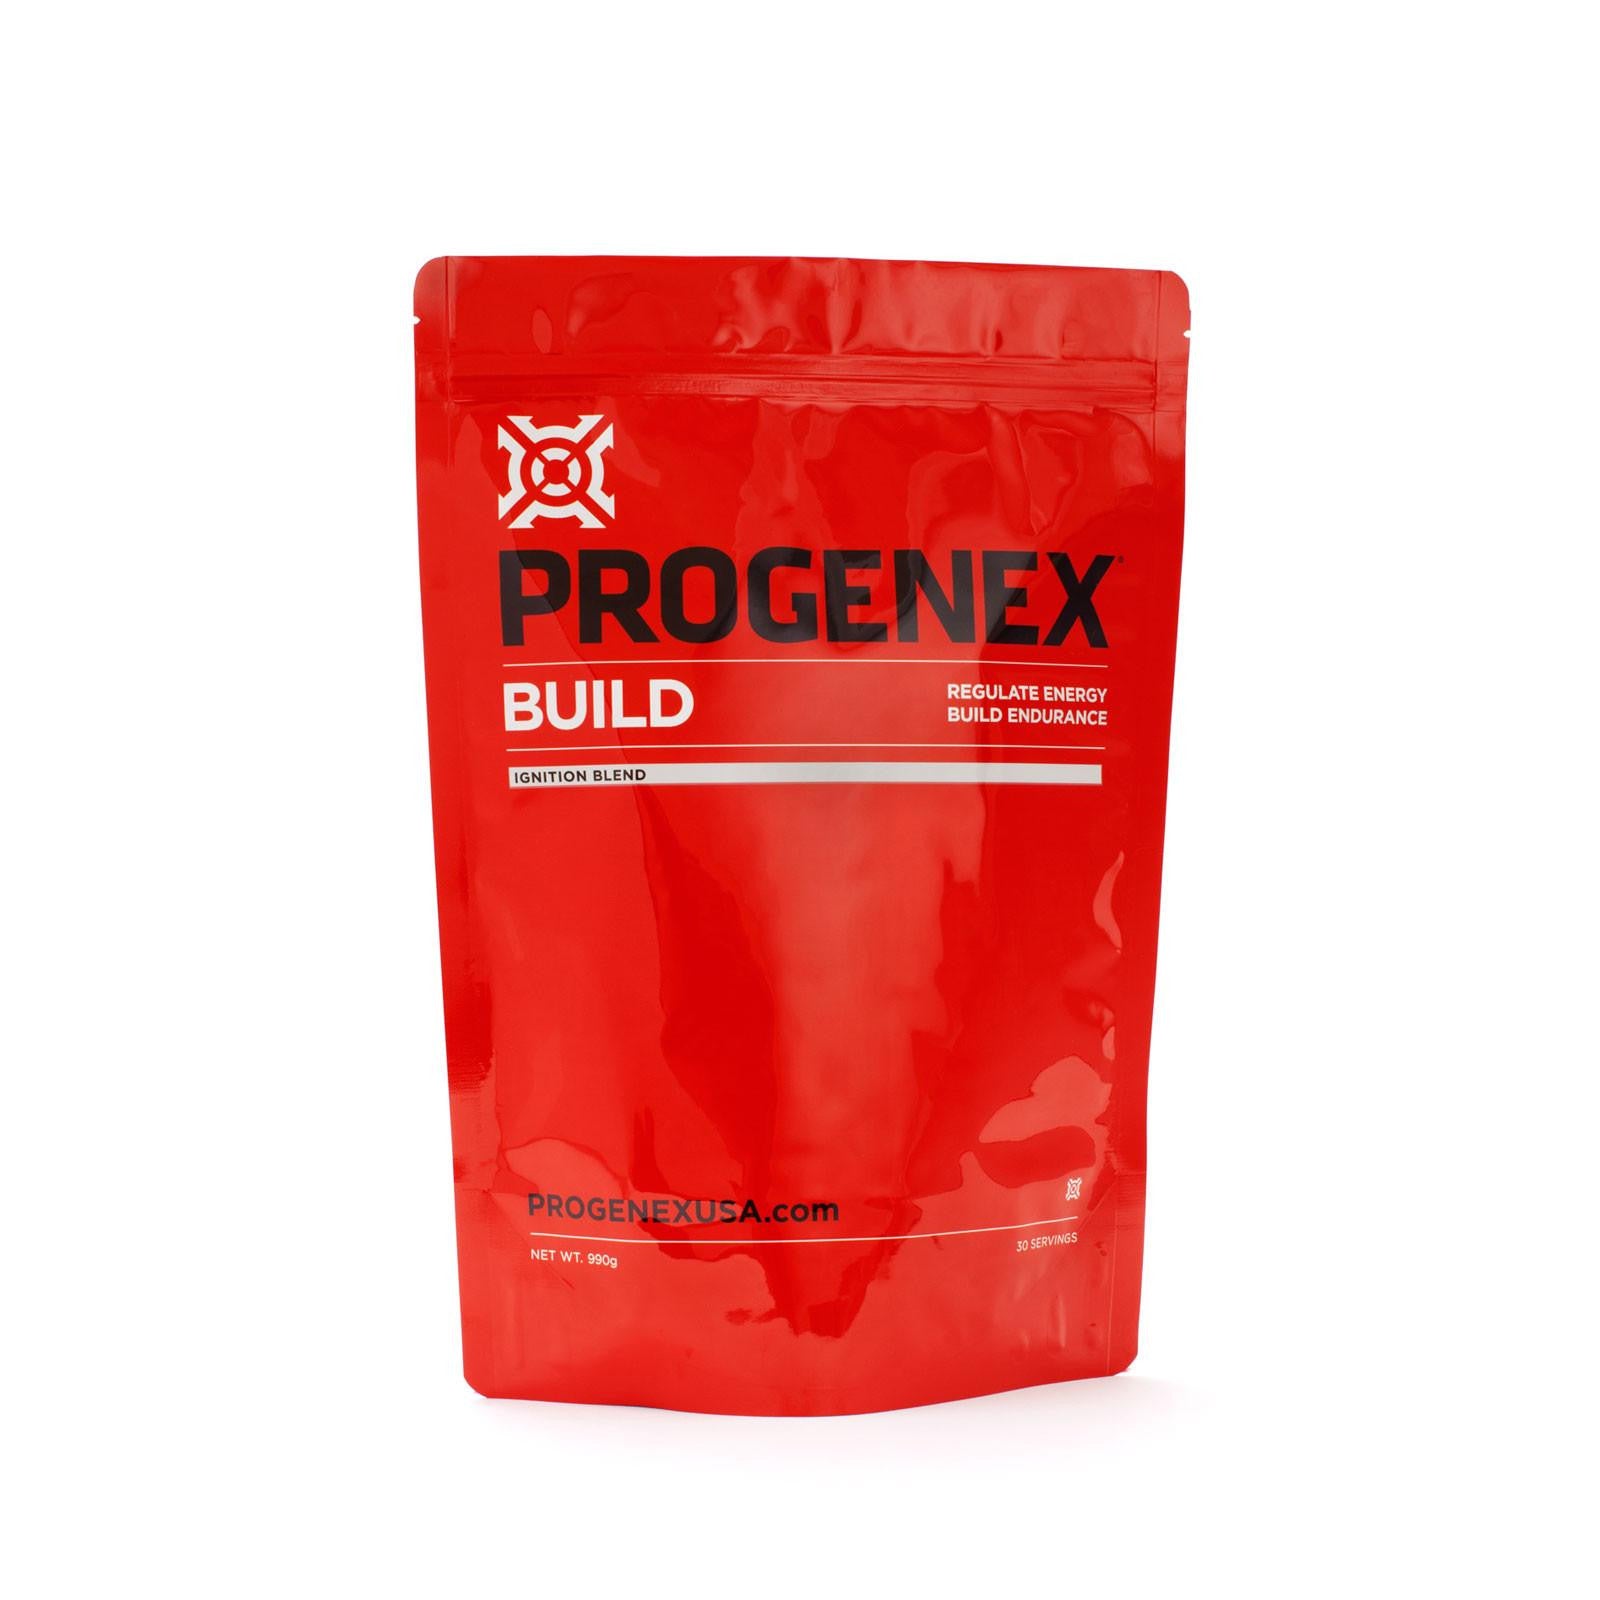 Best Progenex pre workout with Comfort Workout Clothes